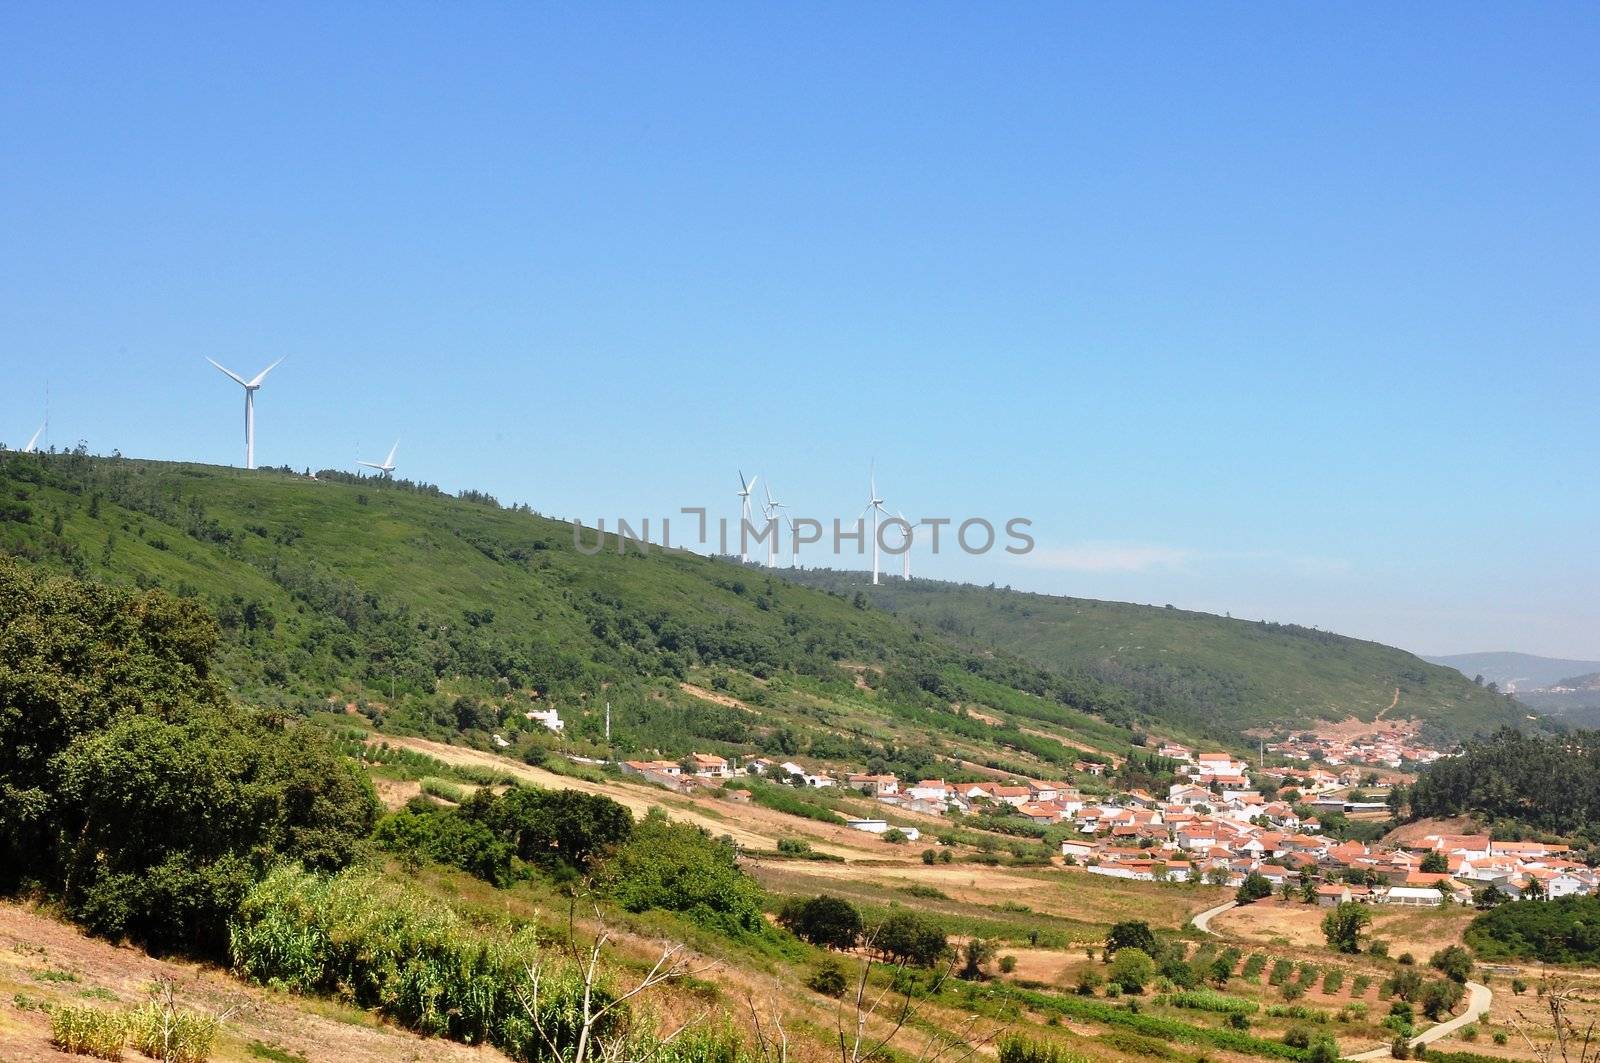 The village on the hillside in Portugal by vas25